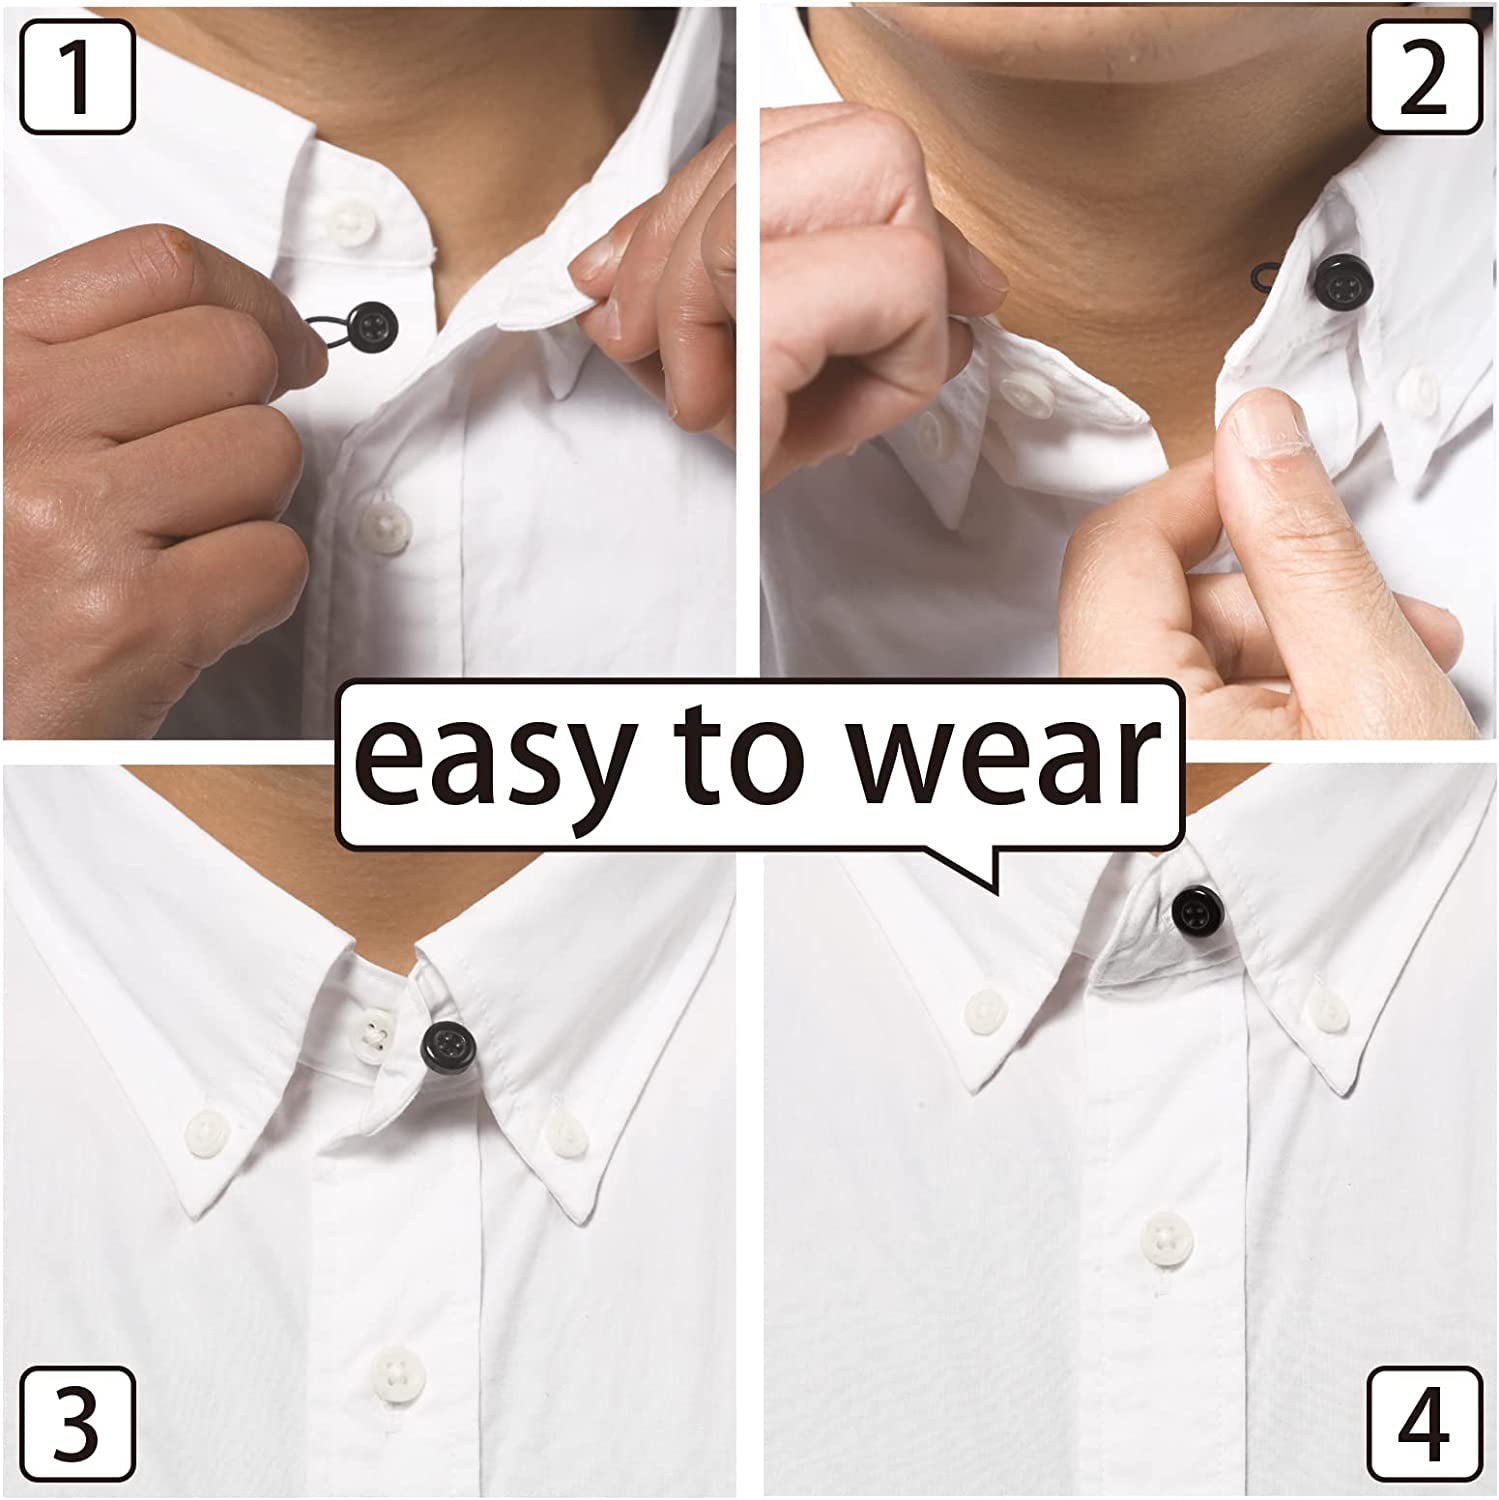 TRIANU Clear Plastic Collar Extenders Stretch Neck Extender for 1/2 Size  Expansion of Men Dress Shirts, 6 Pack, 3/8 